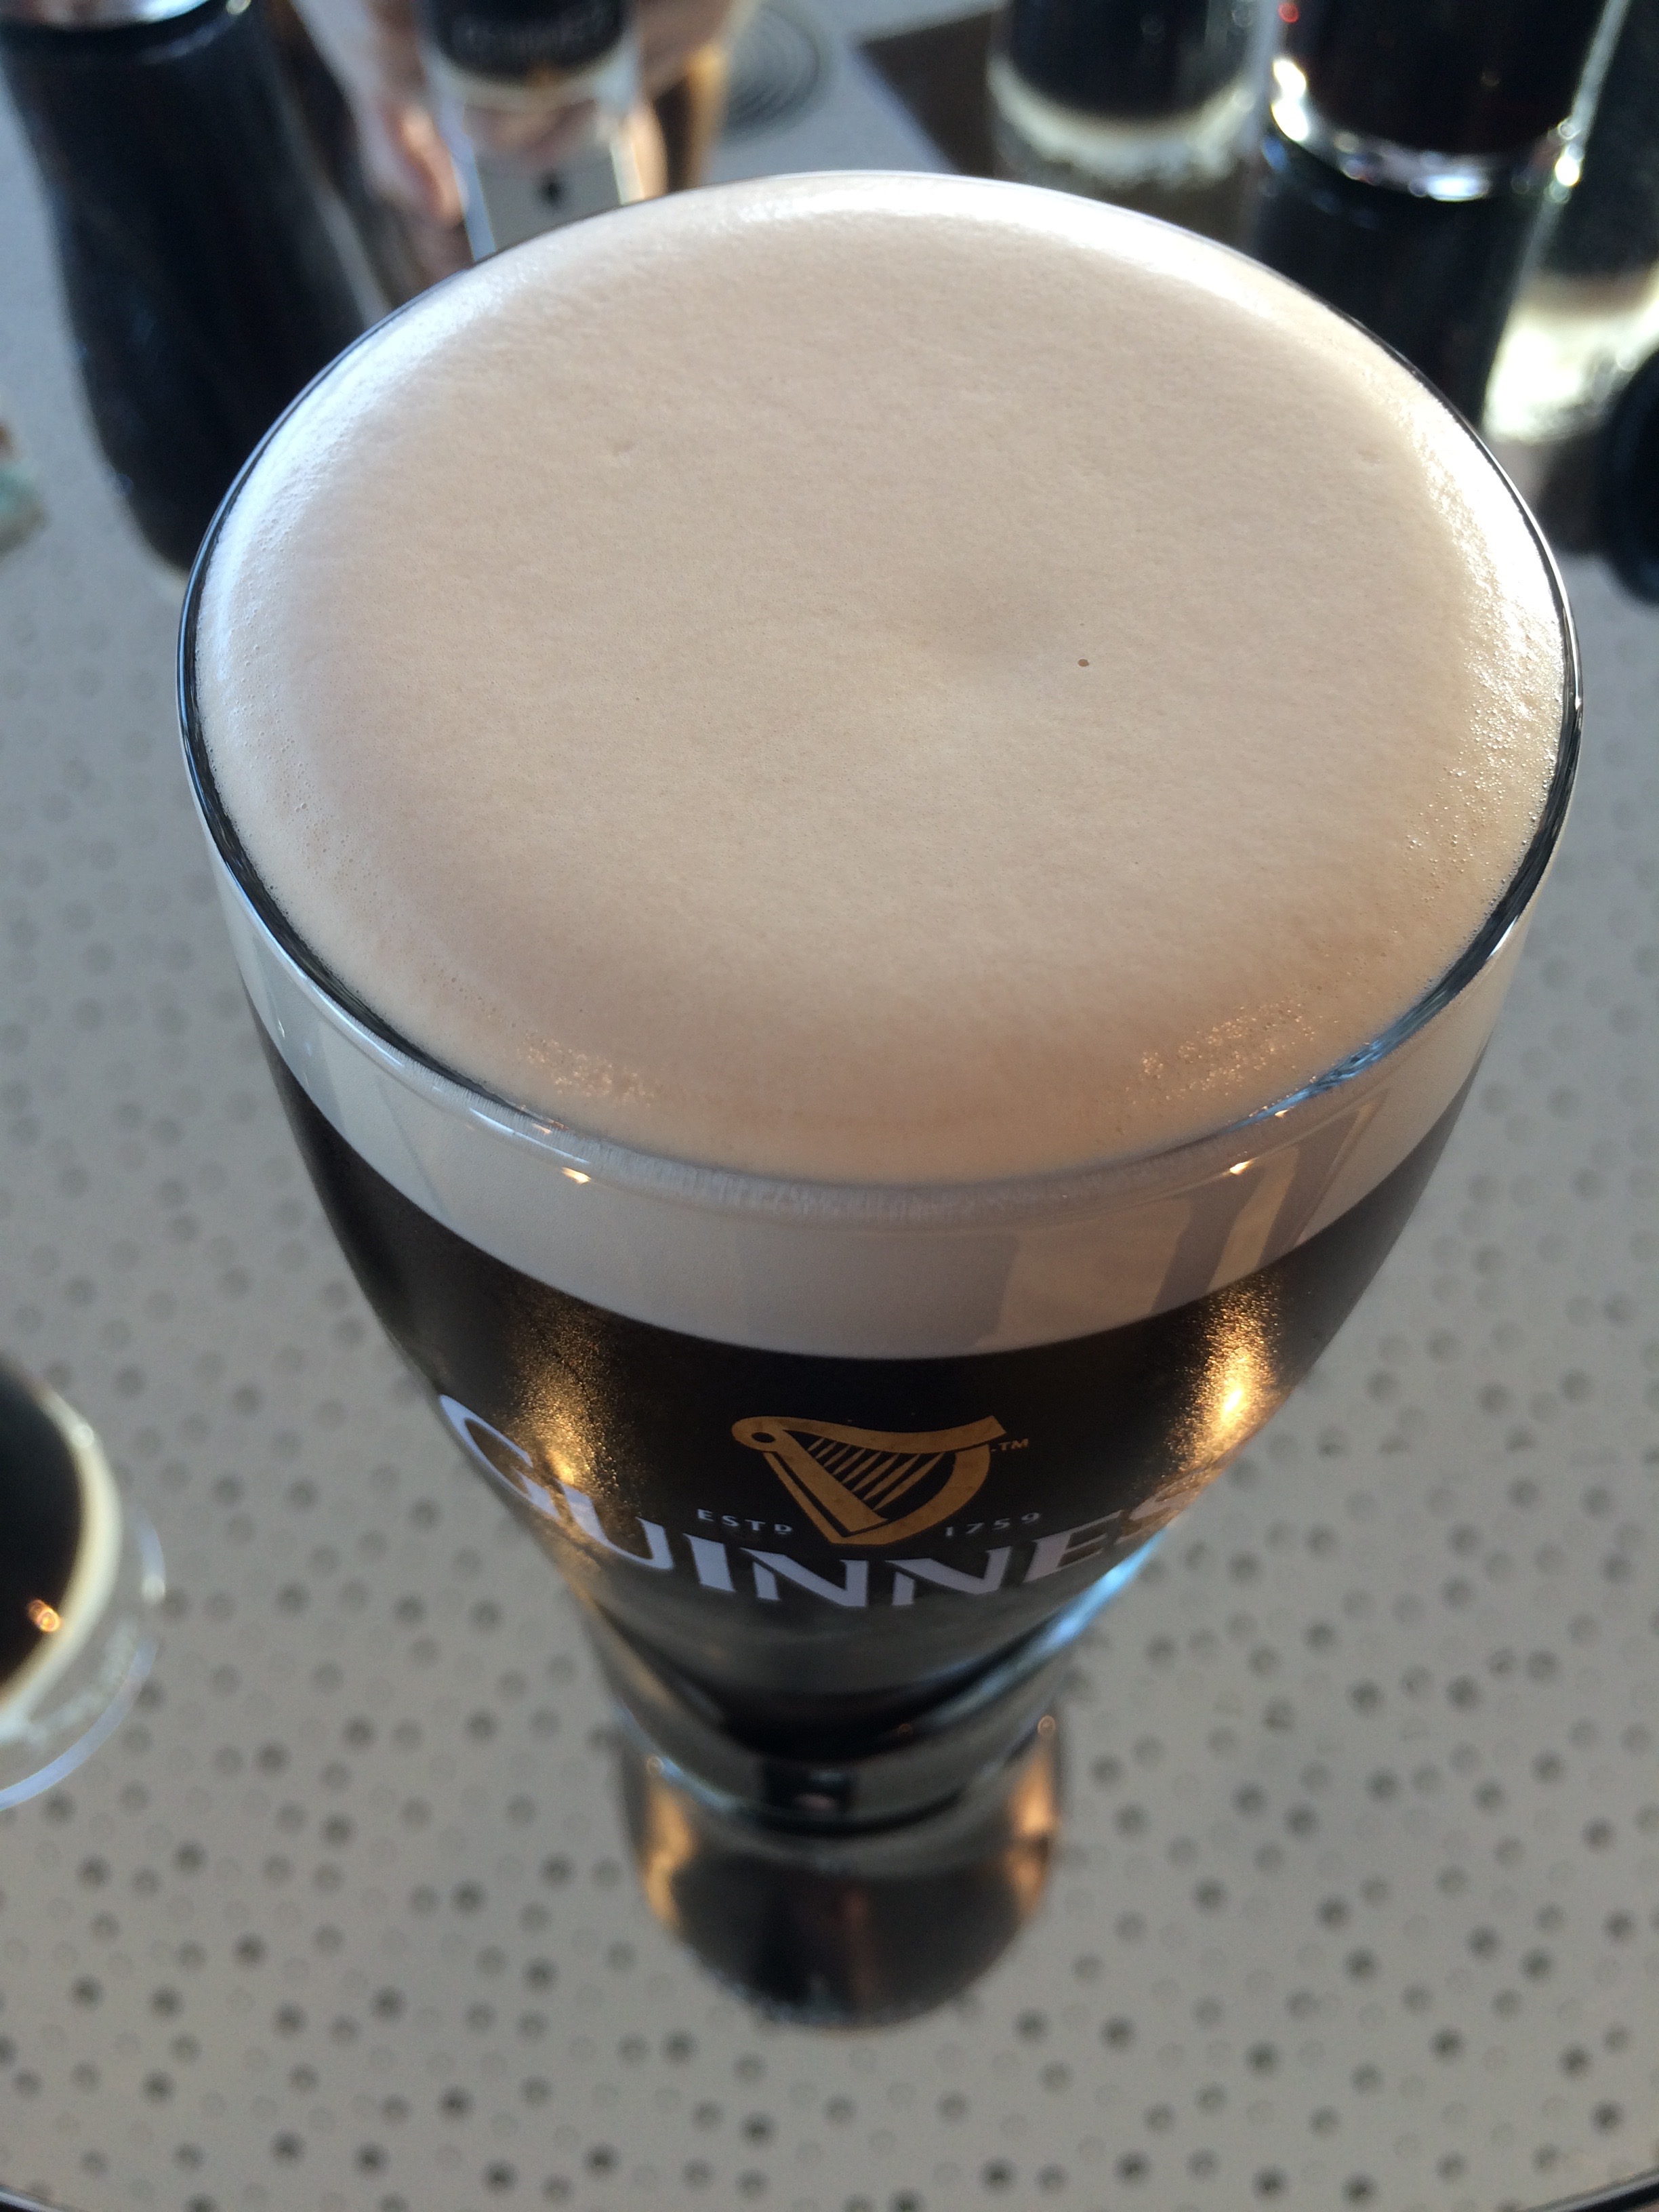 Nice creamy head on a Guinness at the Gravity Bar.